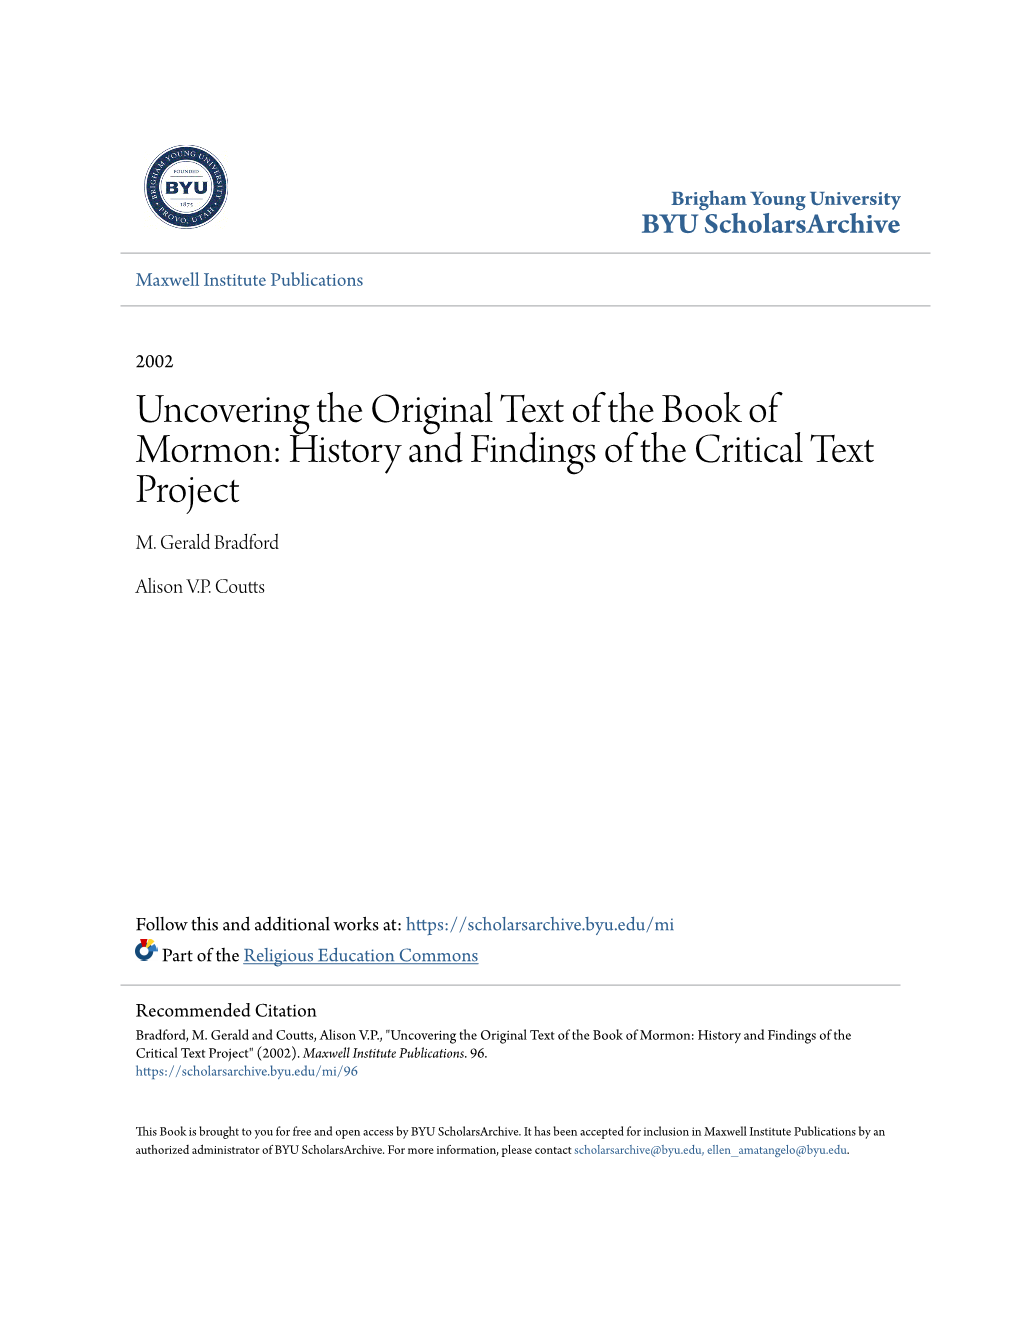 Uncovering the Original Text of the Book of Mormon: History and Findings of the Critical Text Project M